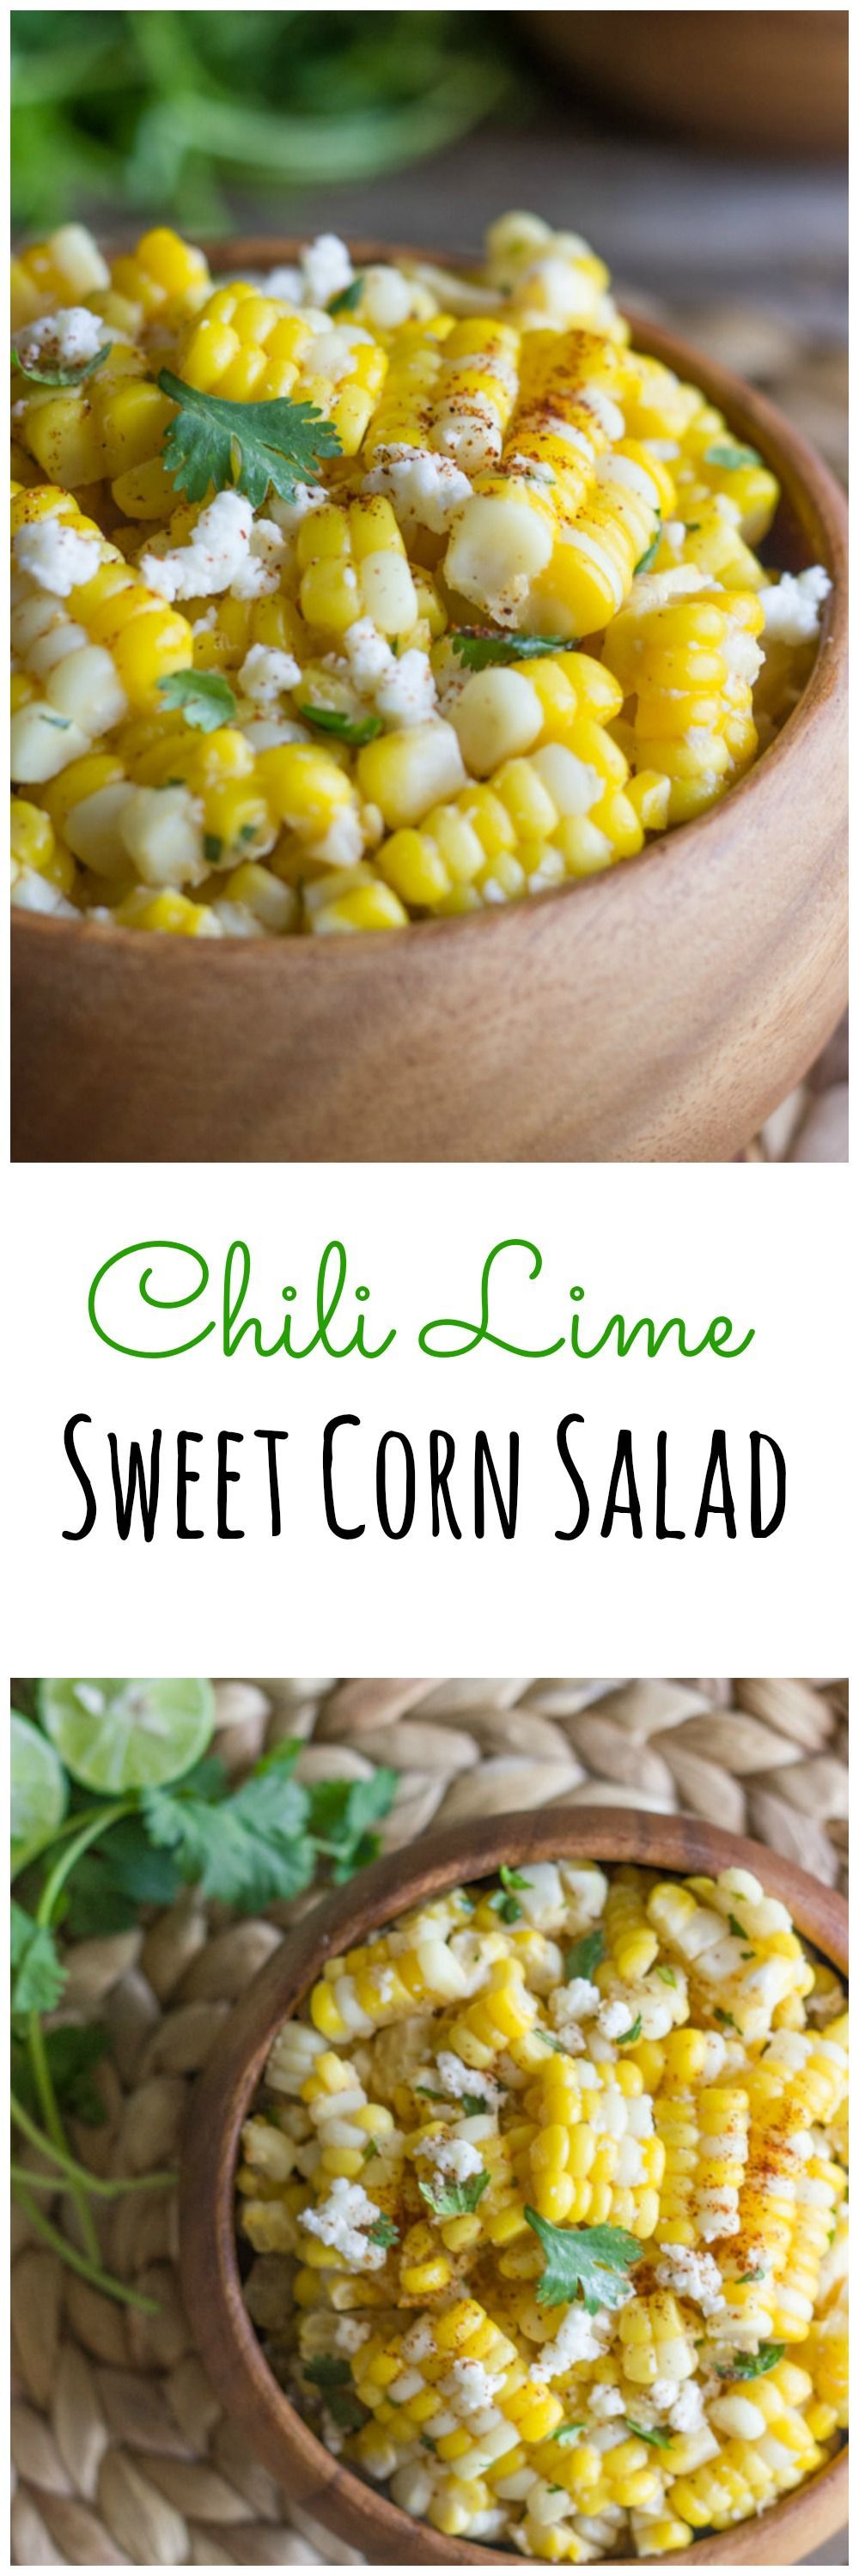 Chili Lime Sweet Corn Salad – sweet corn tossed with butter, fresh lime, chili powder, cilantro, and queso fresco. Amazing!